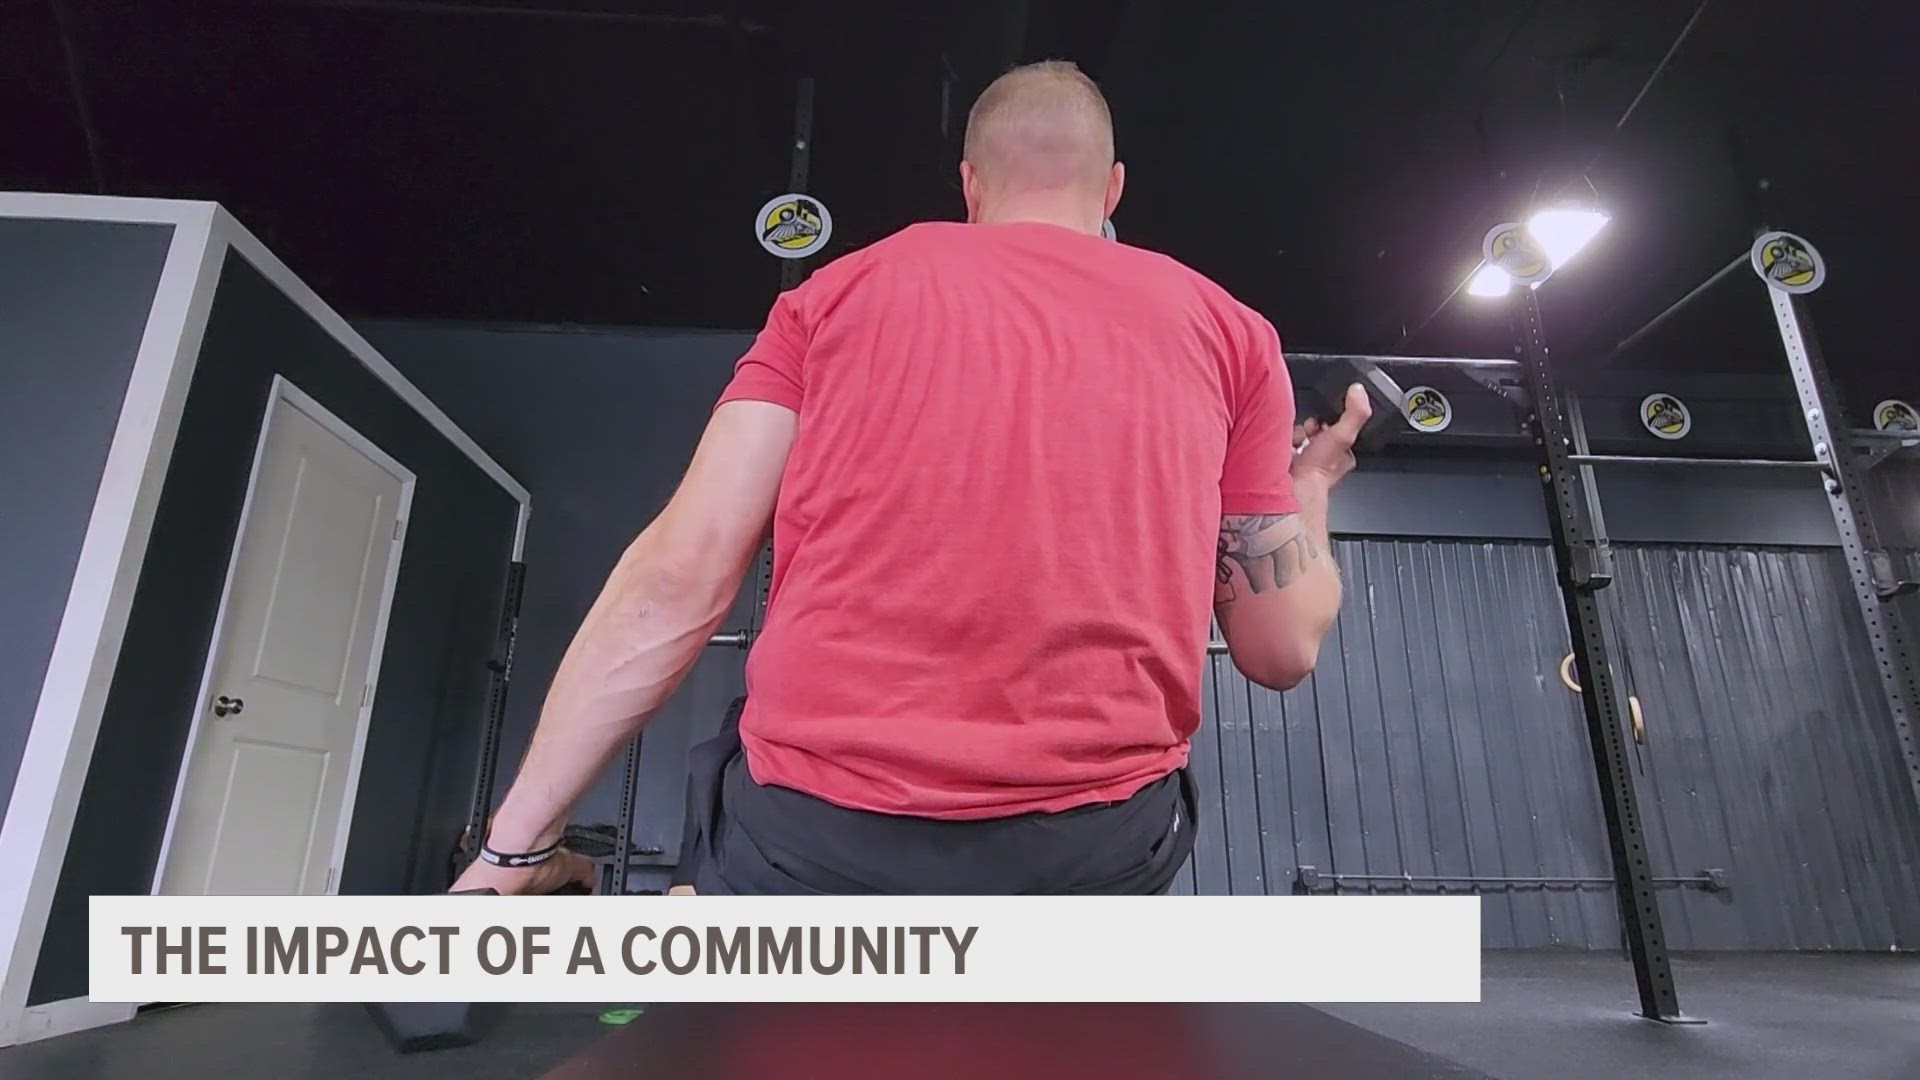 ValorFit founder Troy Peterson told Local 5 the group "gives veterans a place to go when they’re at their worst, to feel a part of the team."